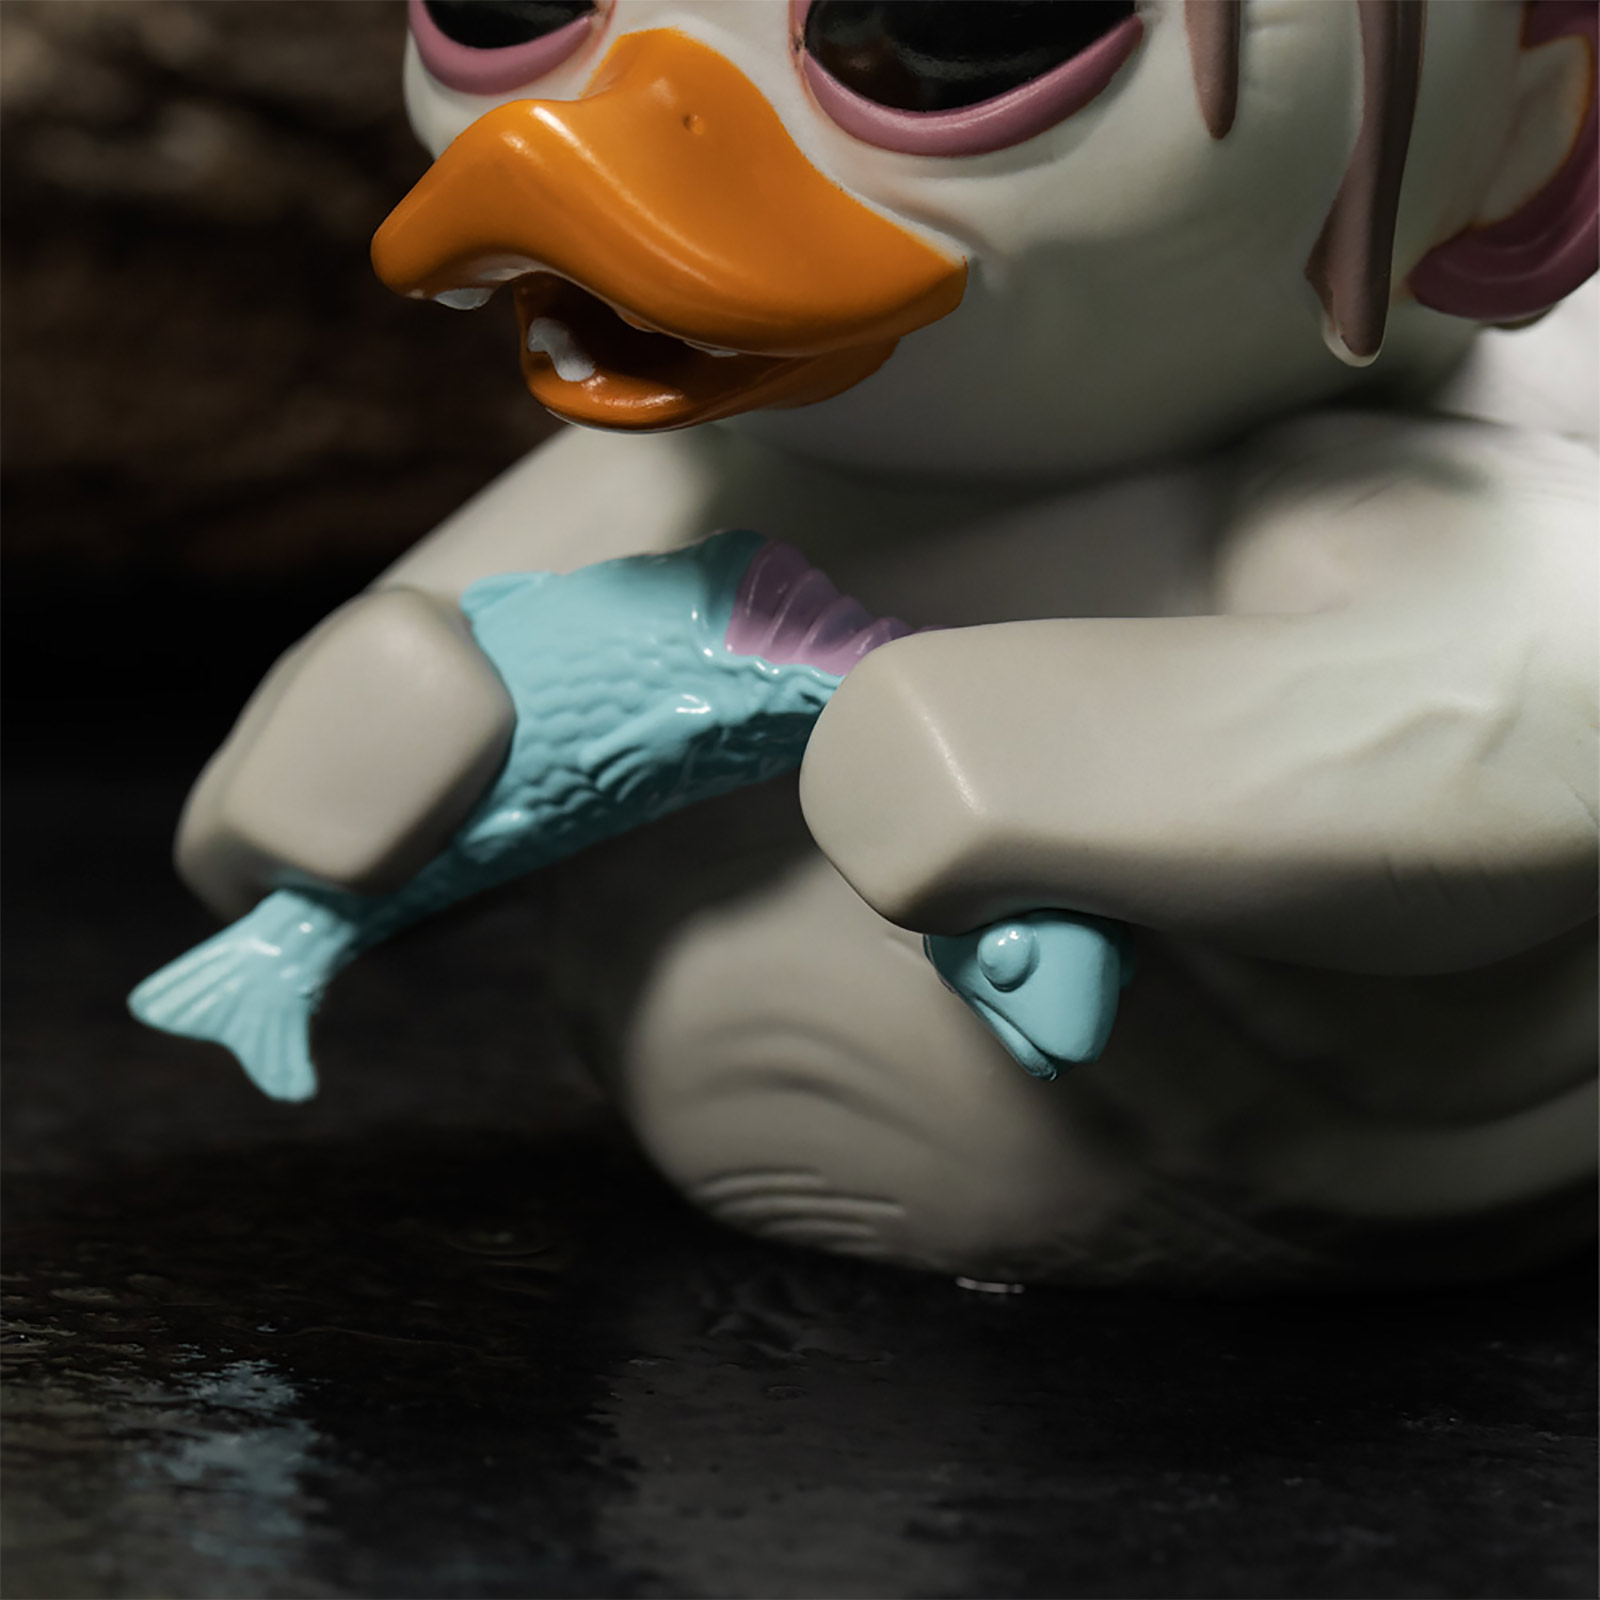 Lord of the Rings - Gollum TUBBZ Decorative Duck